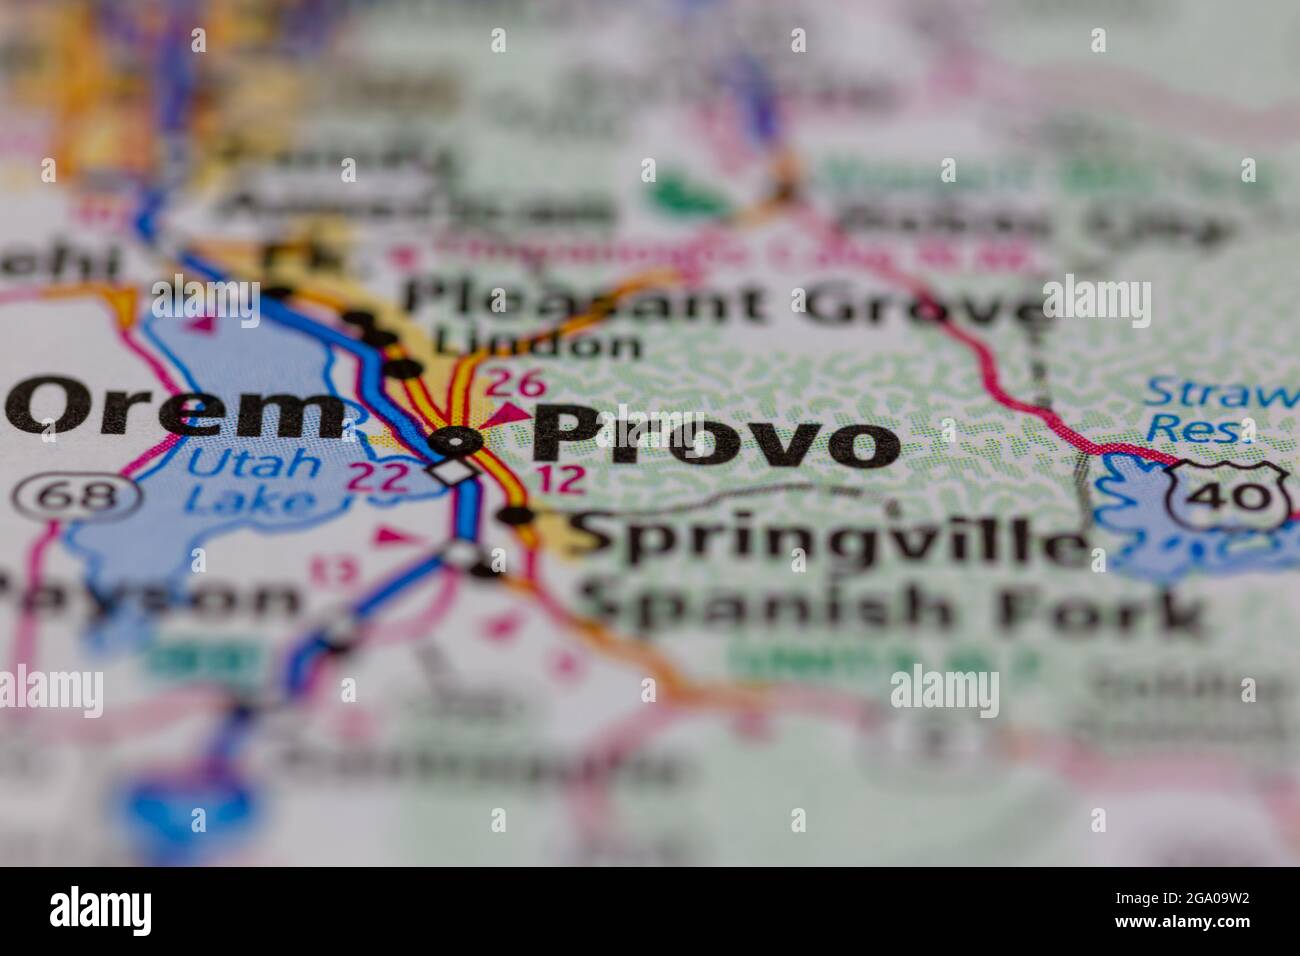 Provo Utah USA shown on a road map or Geography map Stock Photo